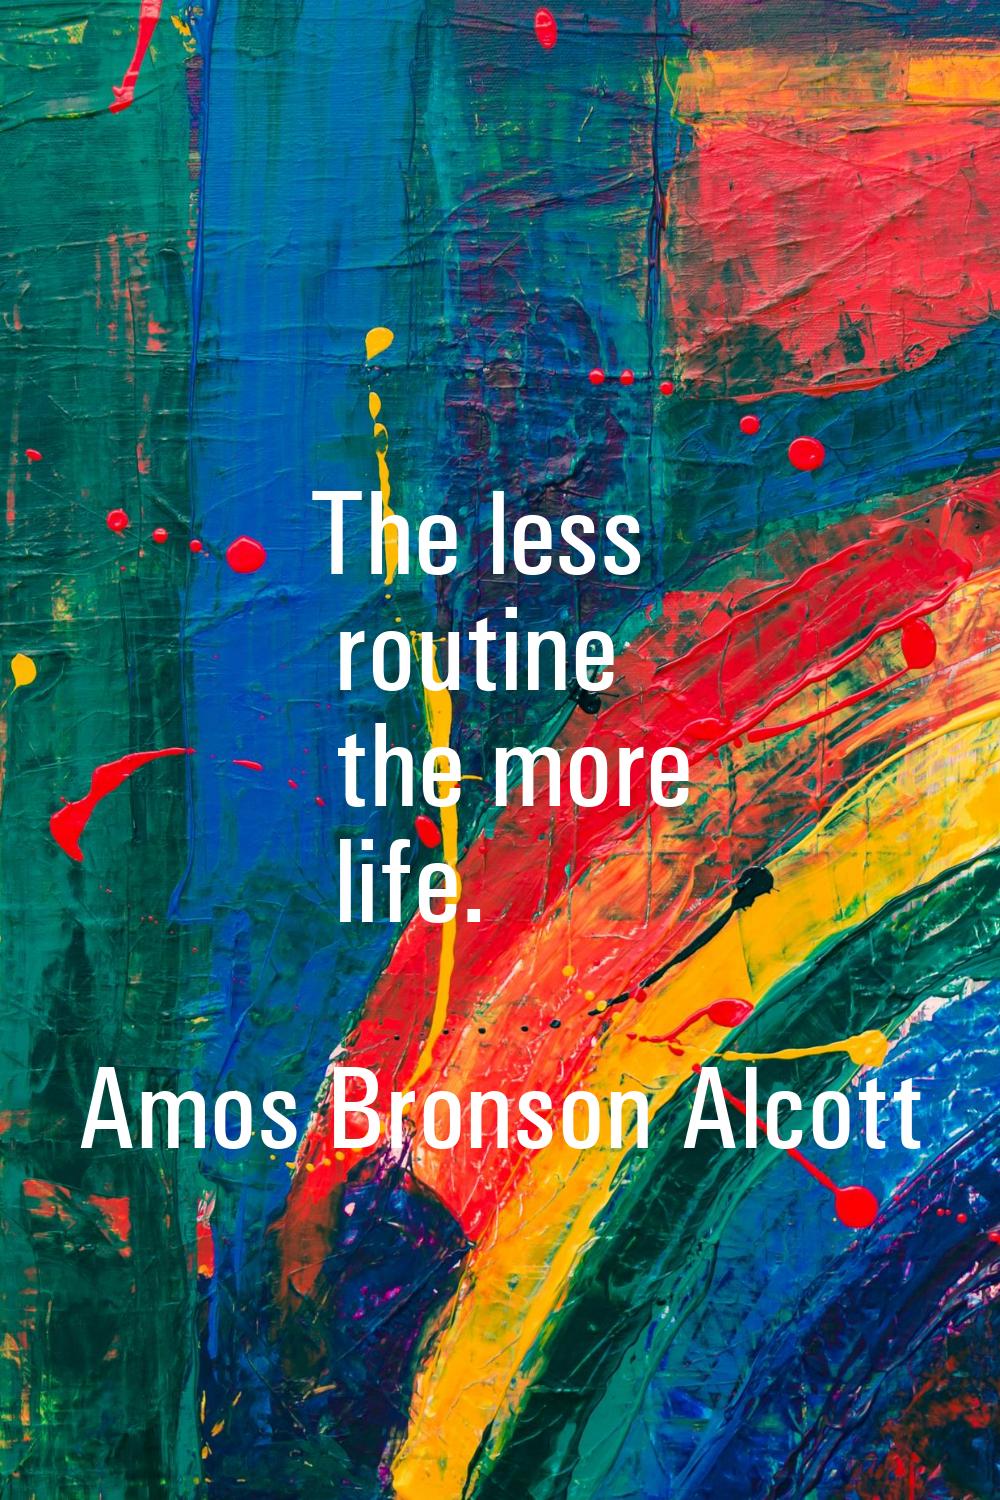 The less routine the more life.